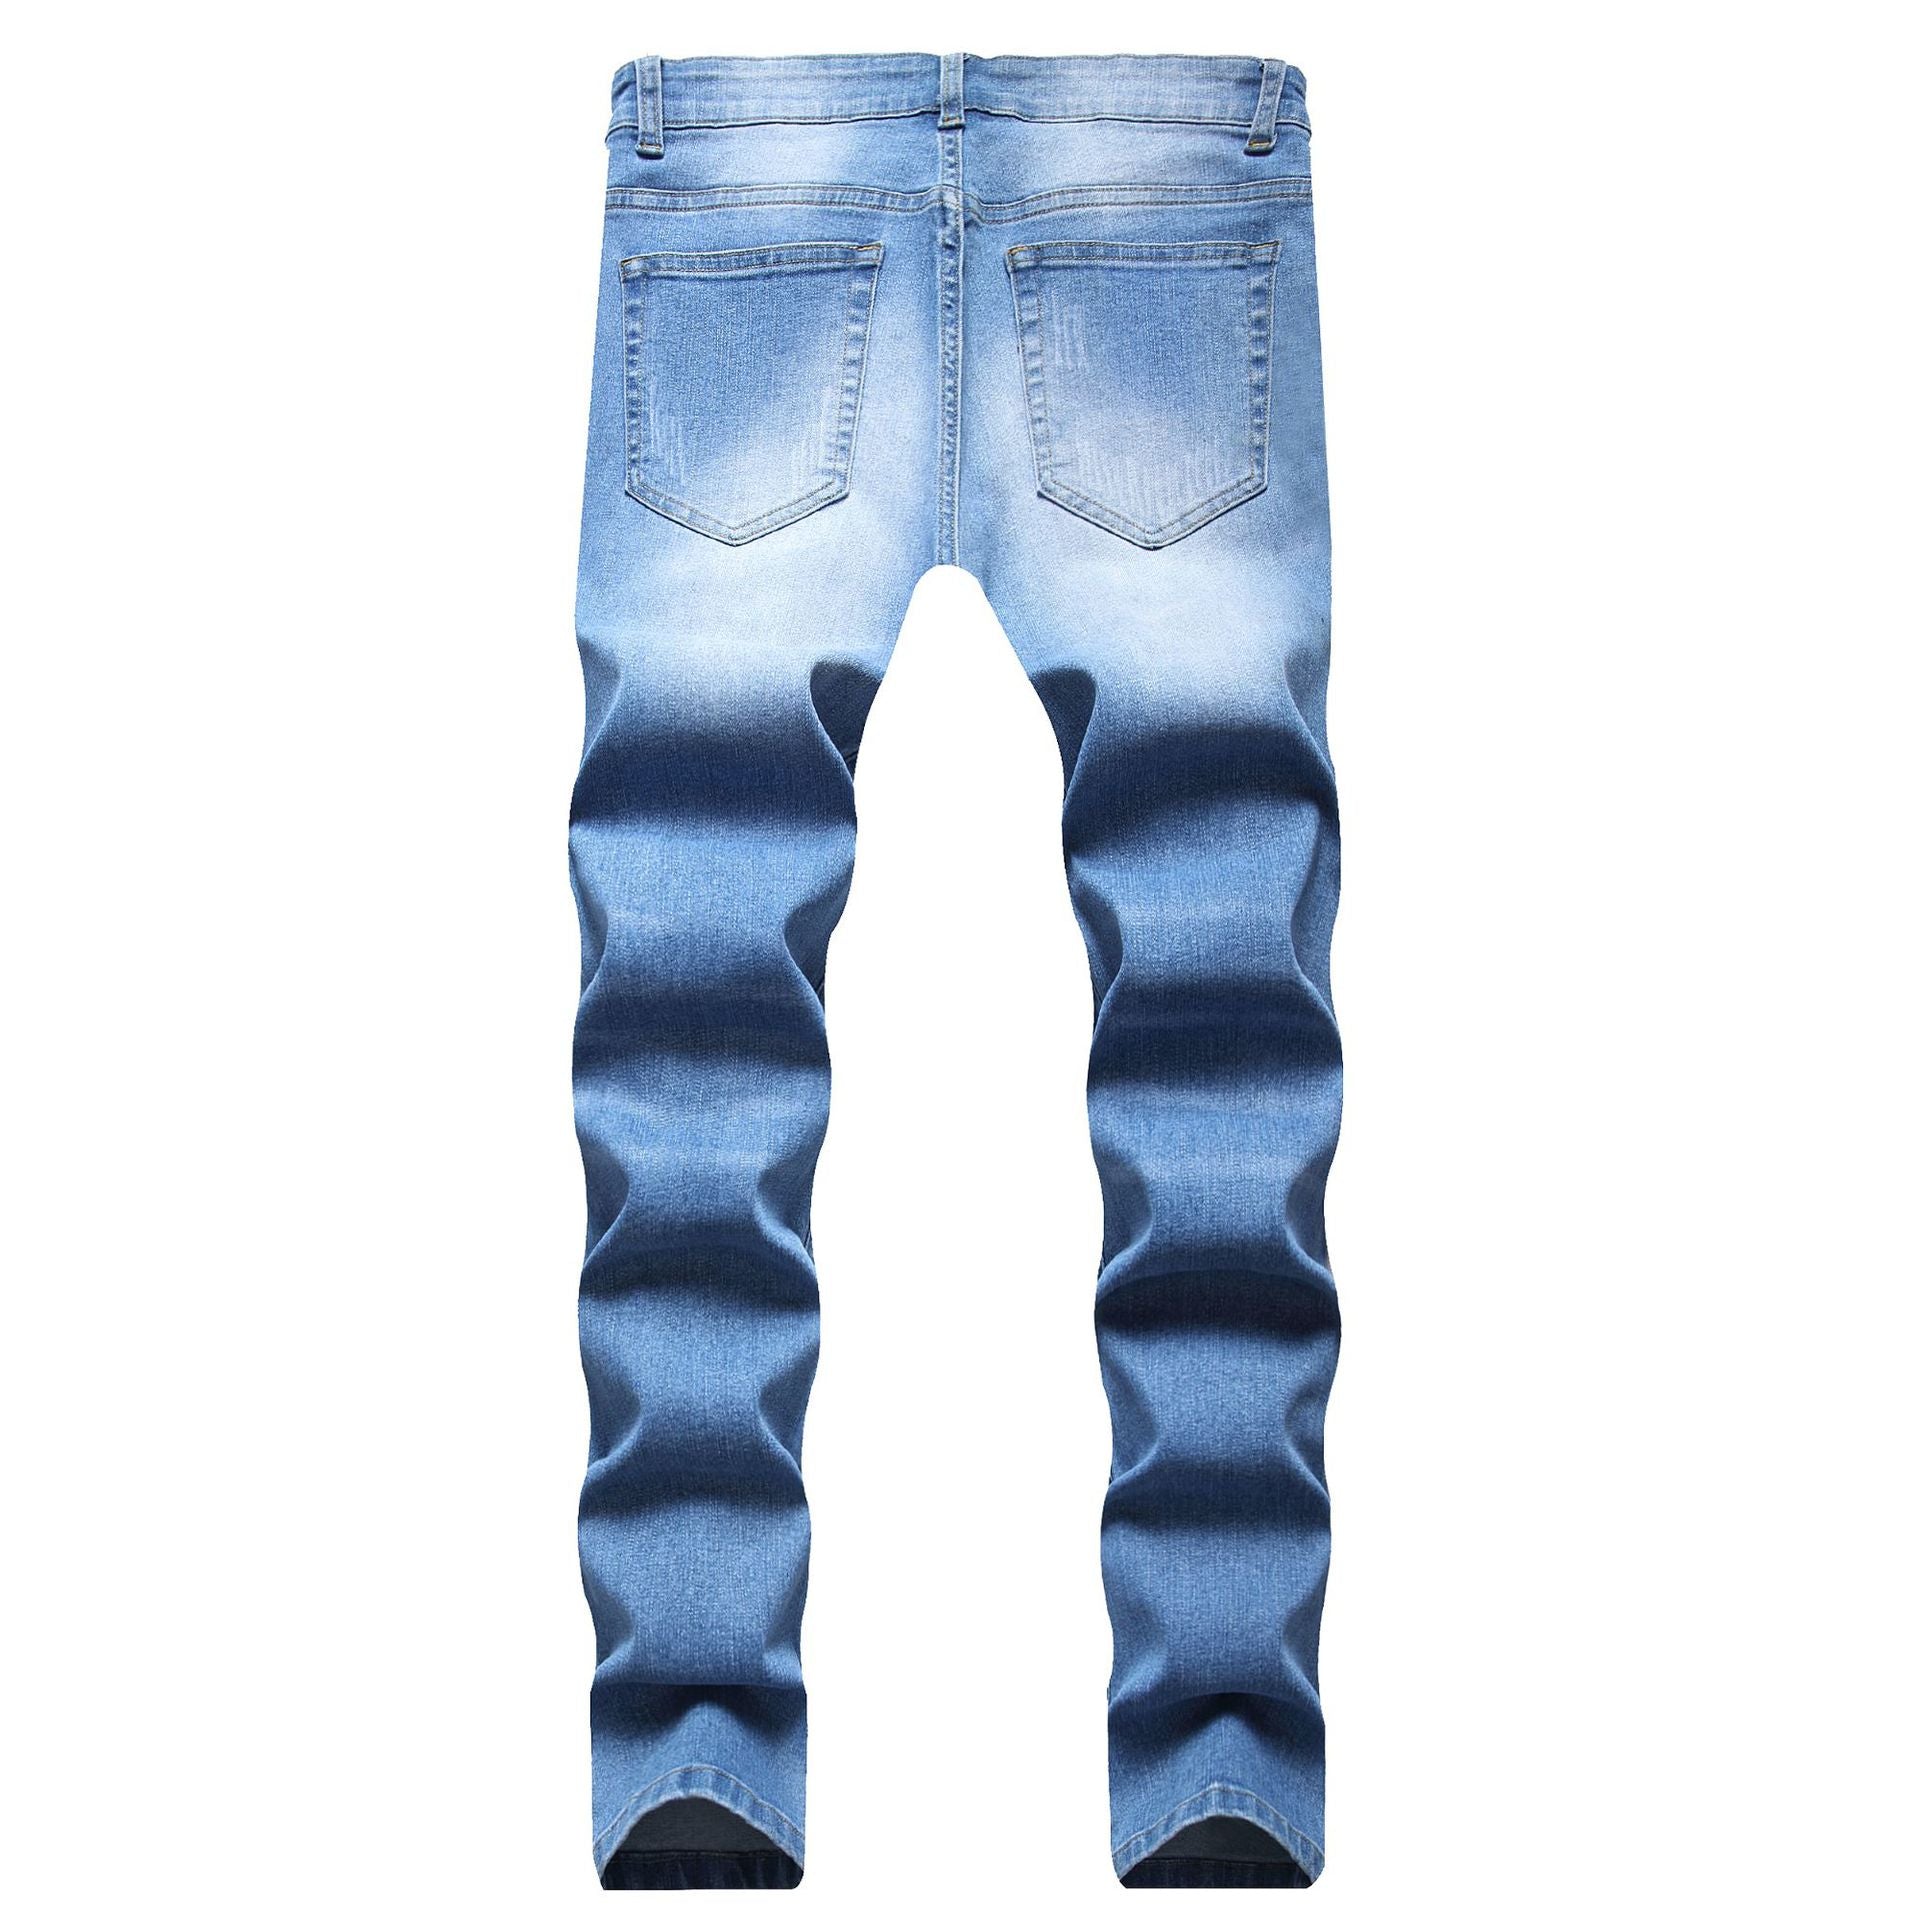 Men's Small Feet Jeans European And American Frayed Casual Slim Jeans